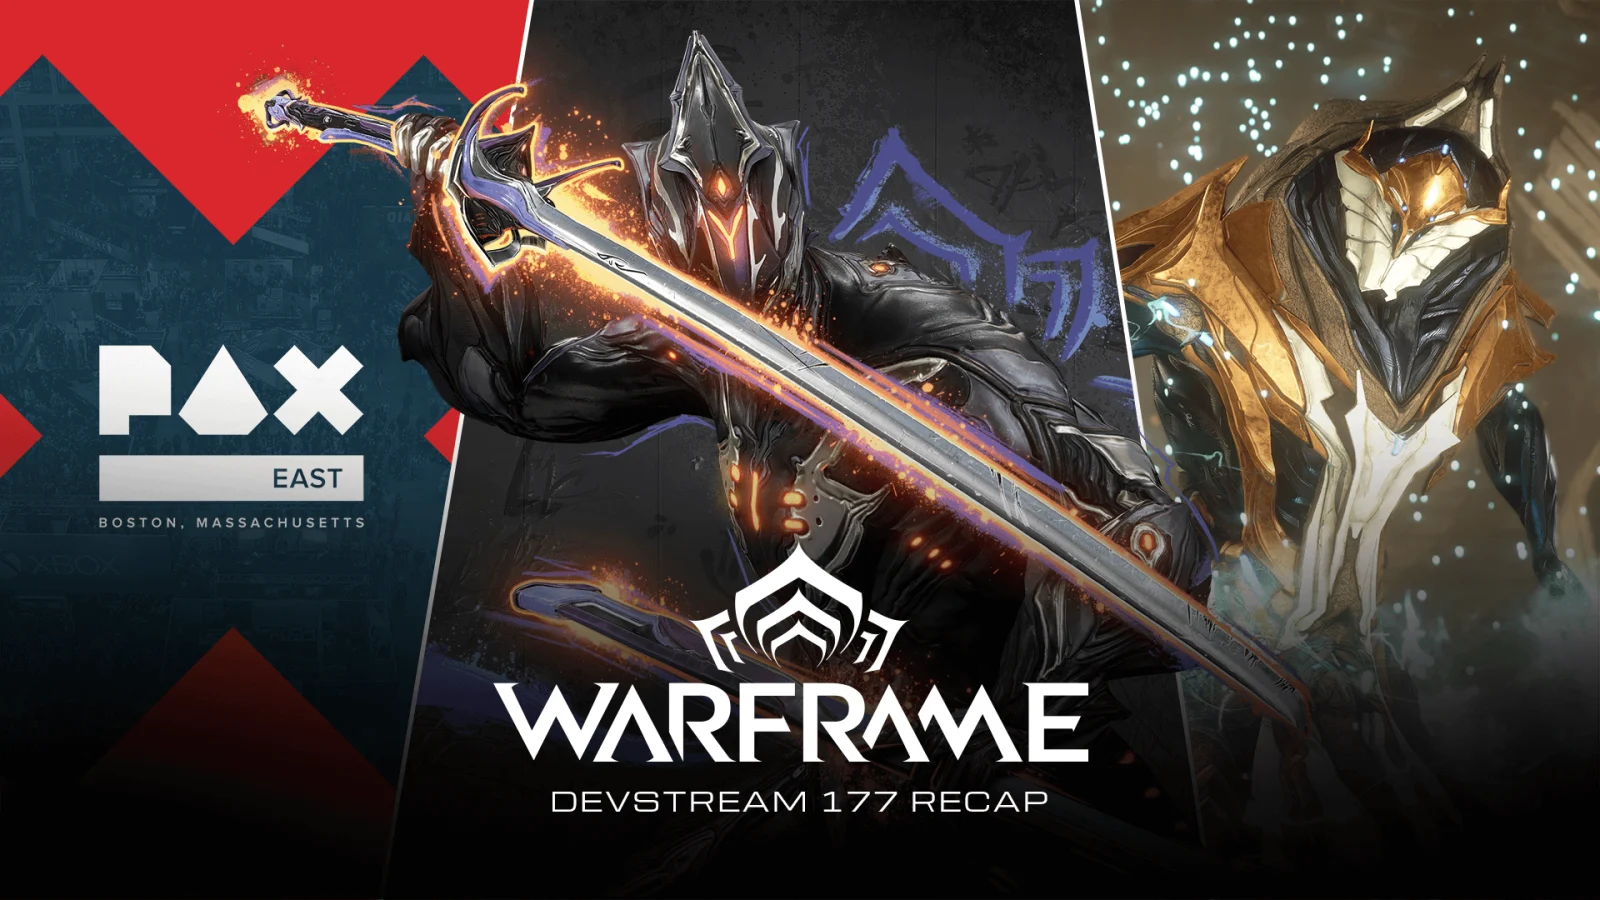 Warframe Sets the Stage for an Action-Packed March with Dante Unbound, 11th Anniversary Celebrations, and More! 6